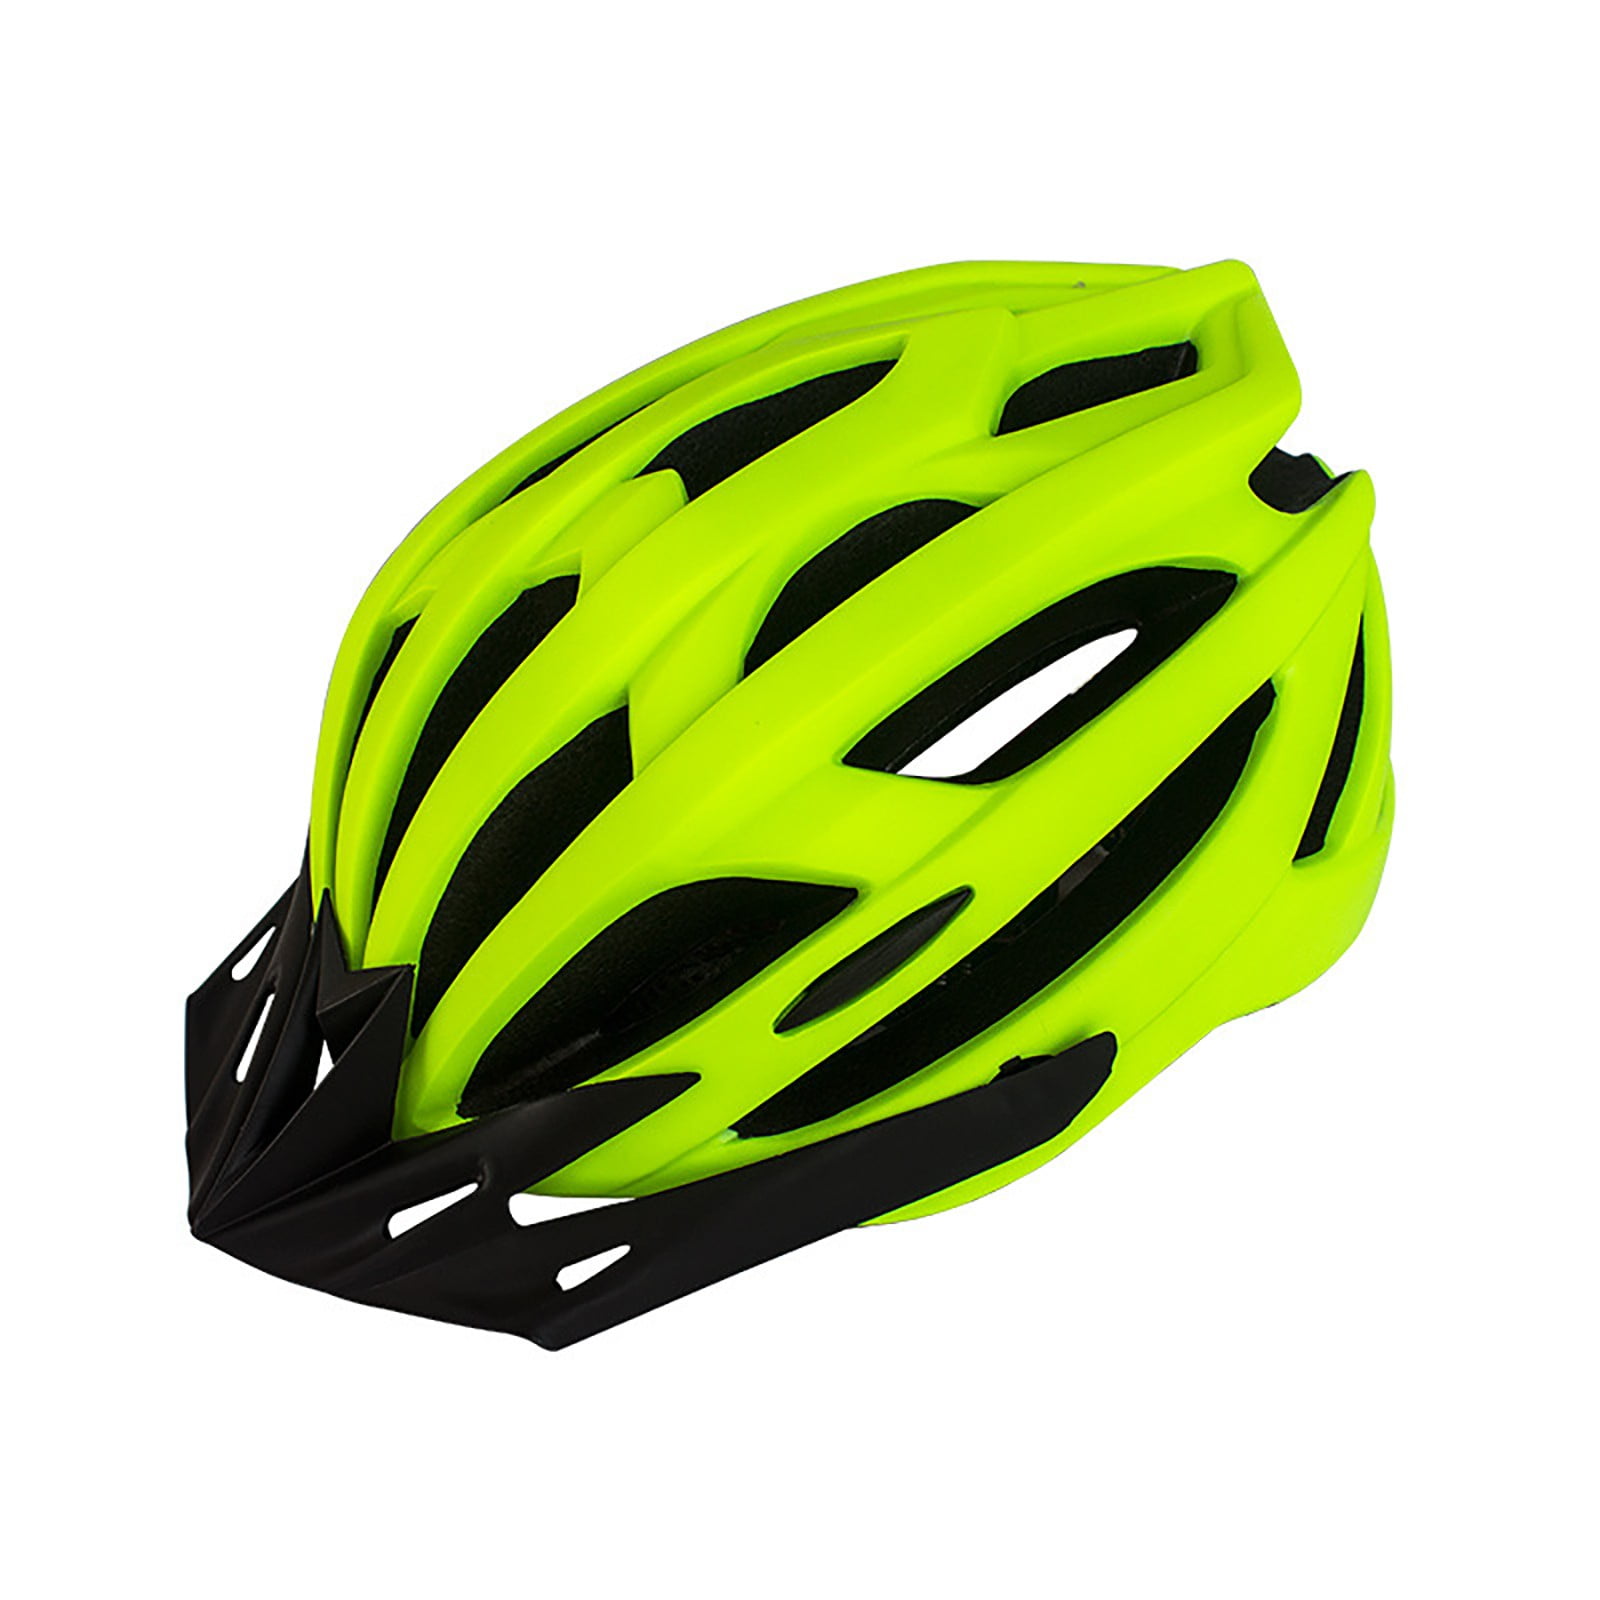 Details about   Bicycle Helmet Bike Cycling MTB Adjustable Unisex Safety Outdoor Sports Helmets 